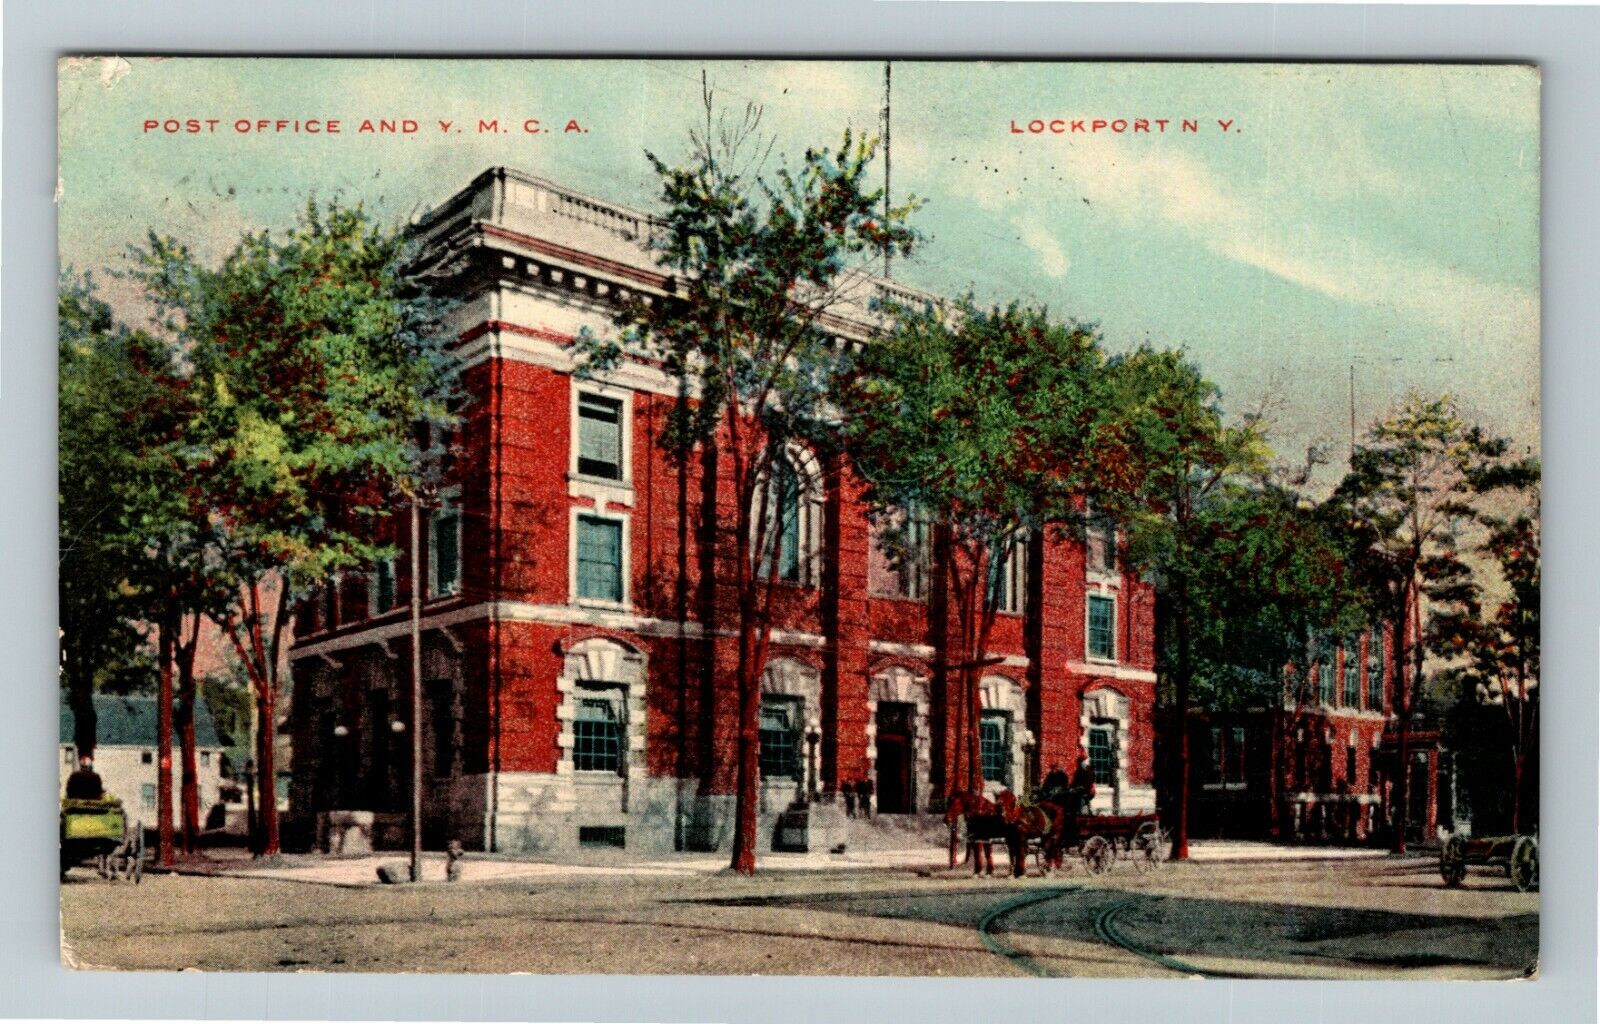 Lockport NY-New York, Post Office And YMCA, Outside, c1910 Vintage Postcard